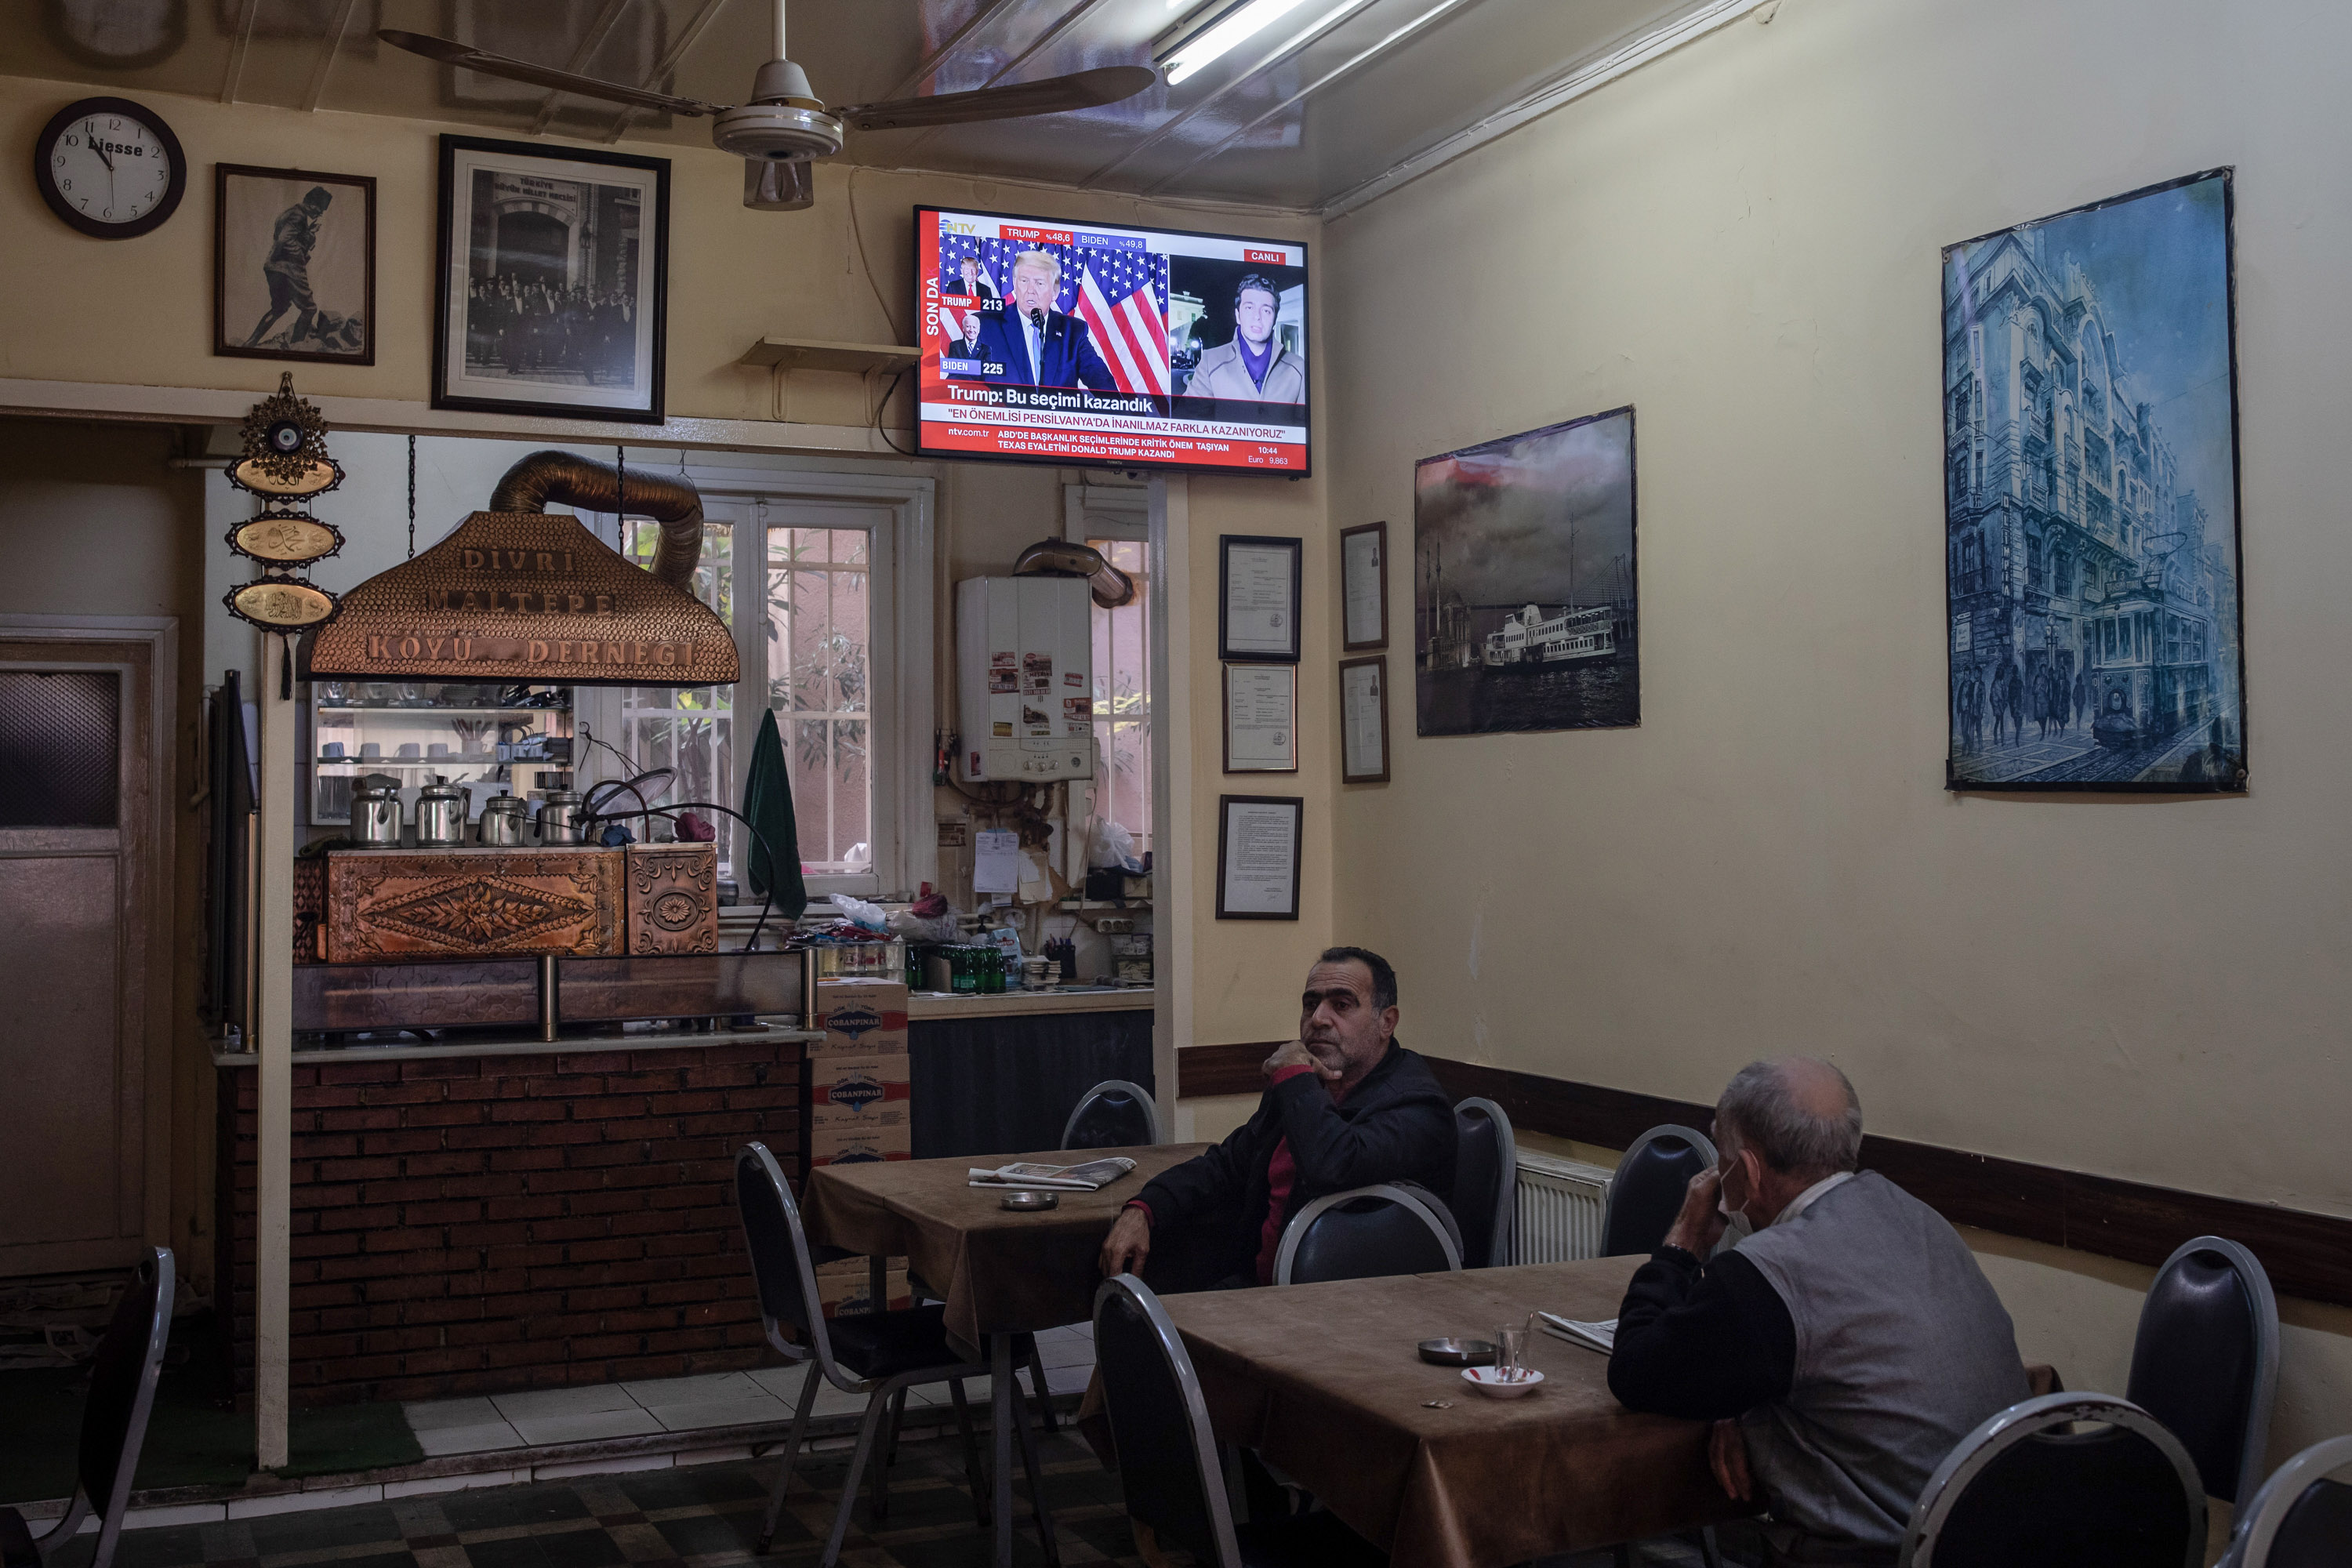 A television broadcast of Donald Trump during election news coverage, inside a teahouse in Istanbul, on Nov. 4.